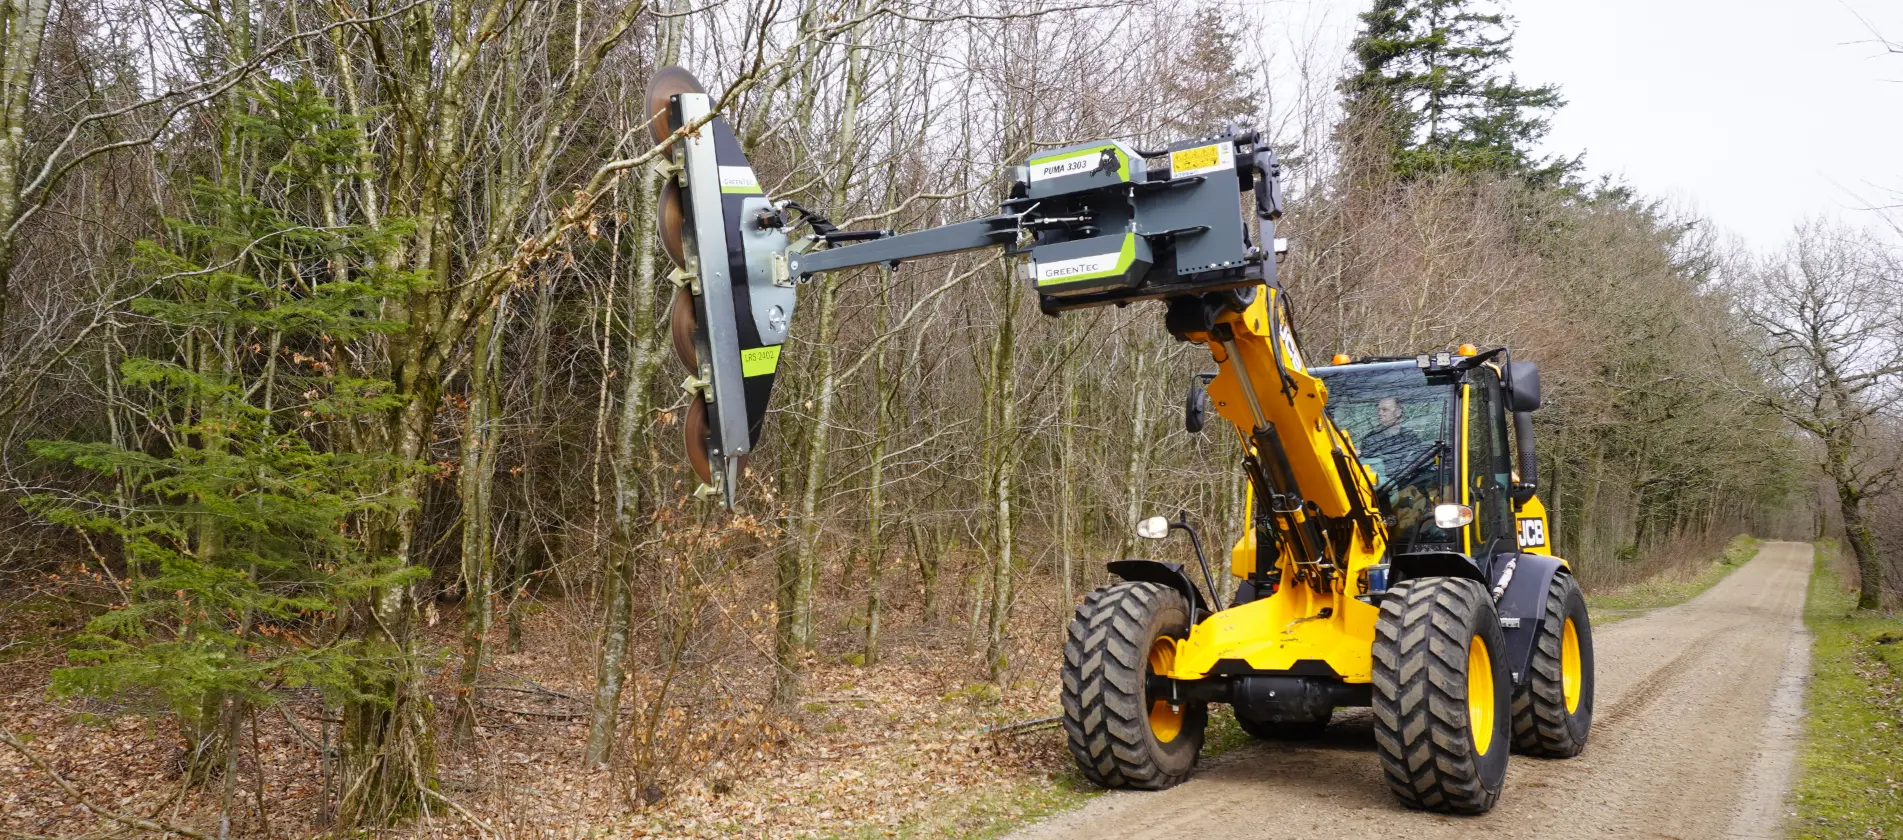 Tree trimmer mounted on a telehandler